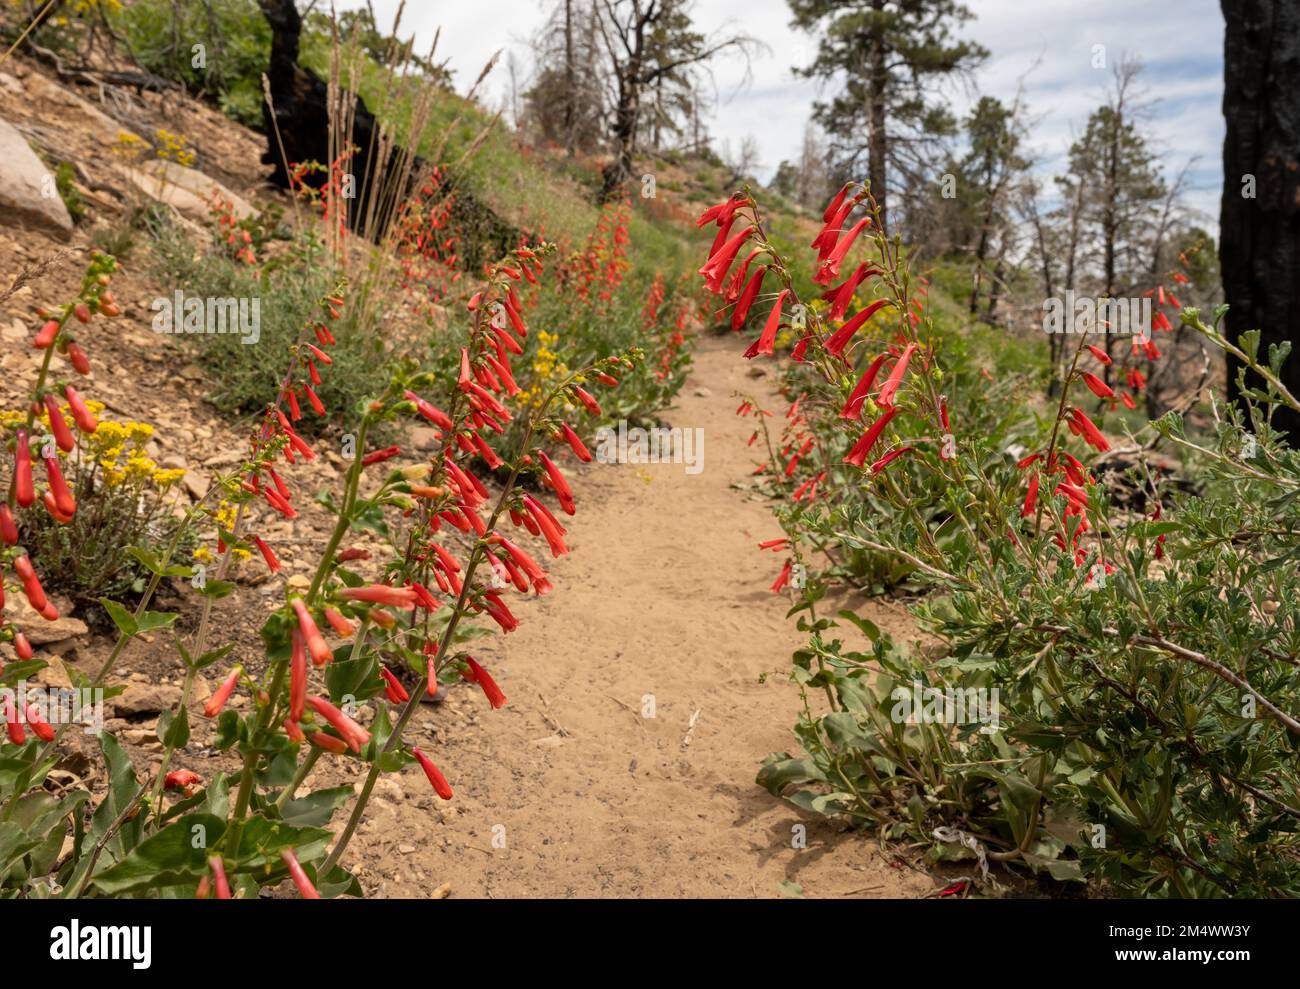 Firecracker Penstemon Line the Trail through Bryce Canyon National Park Stock Photo